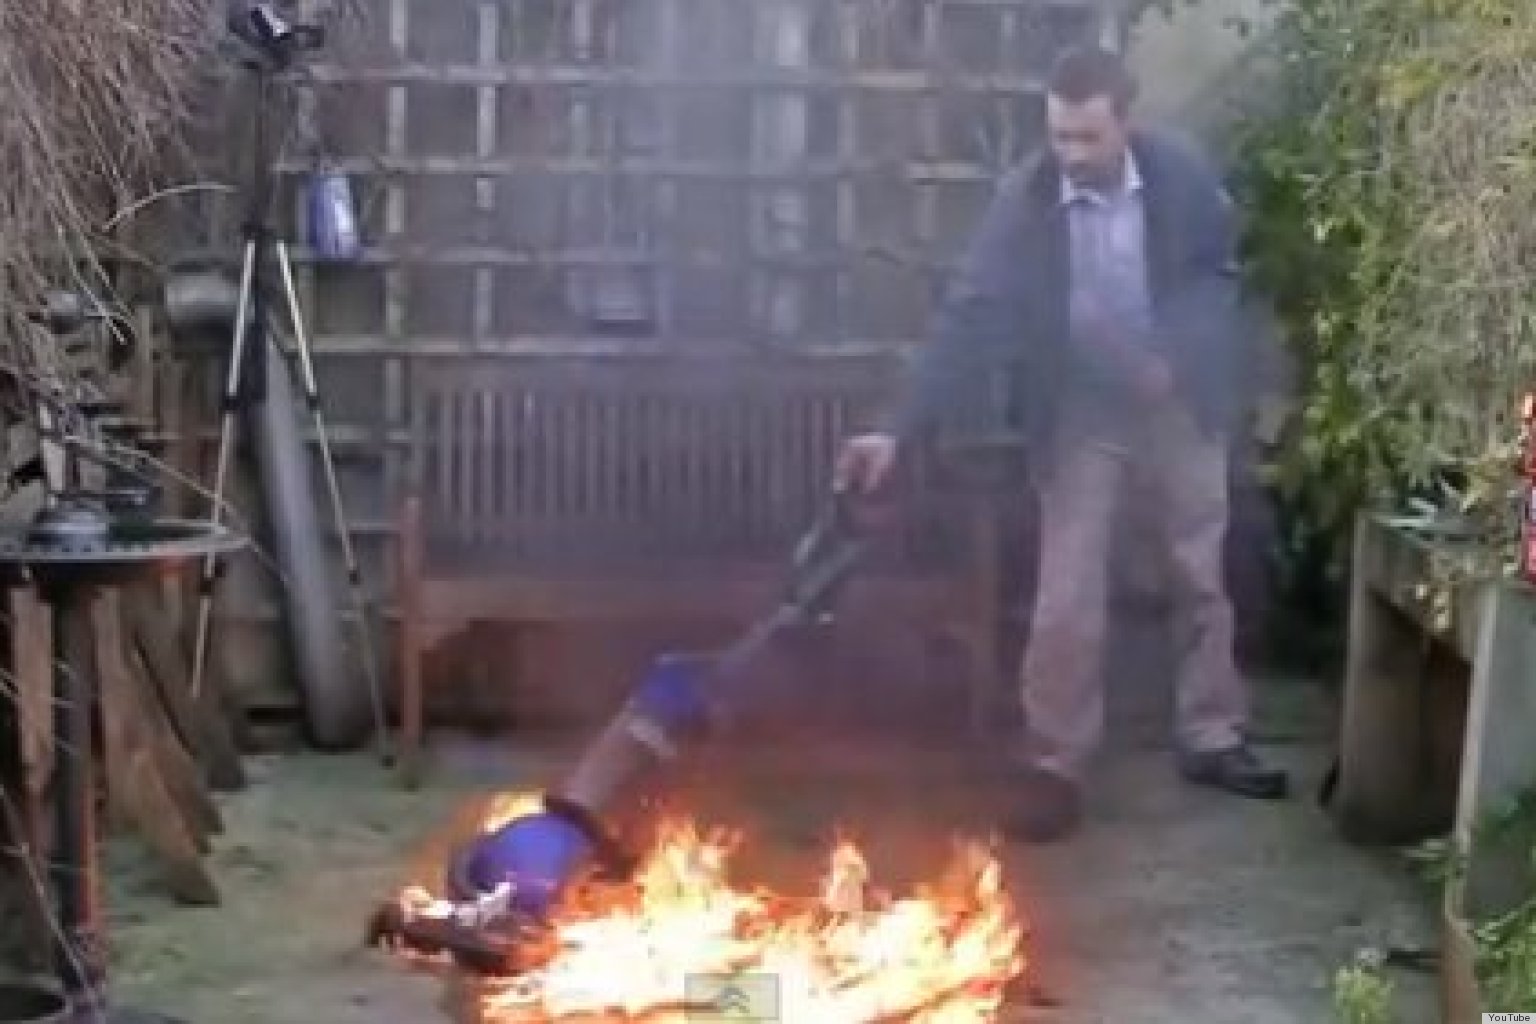 Dyson Vacuum Sucks Up Fire If This Extreme Test Is To Be Believed ...